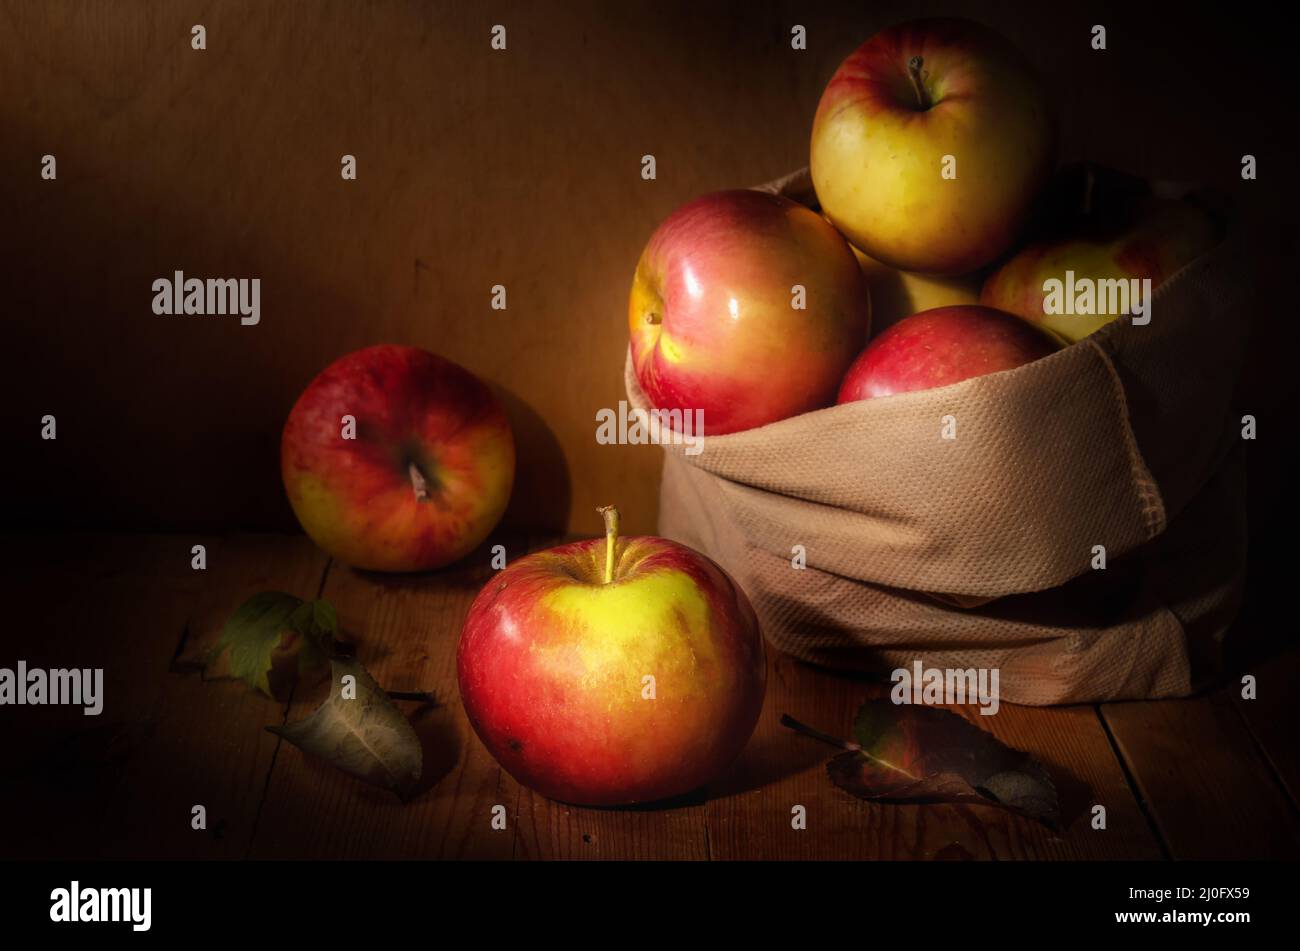 Apples in a cloth bag Stock Photo